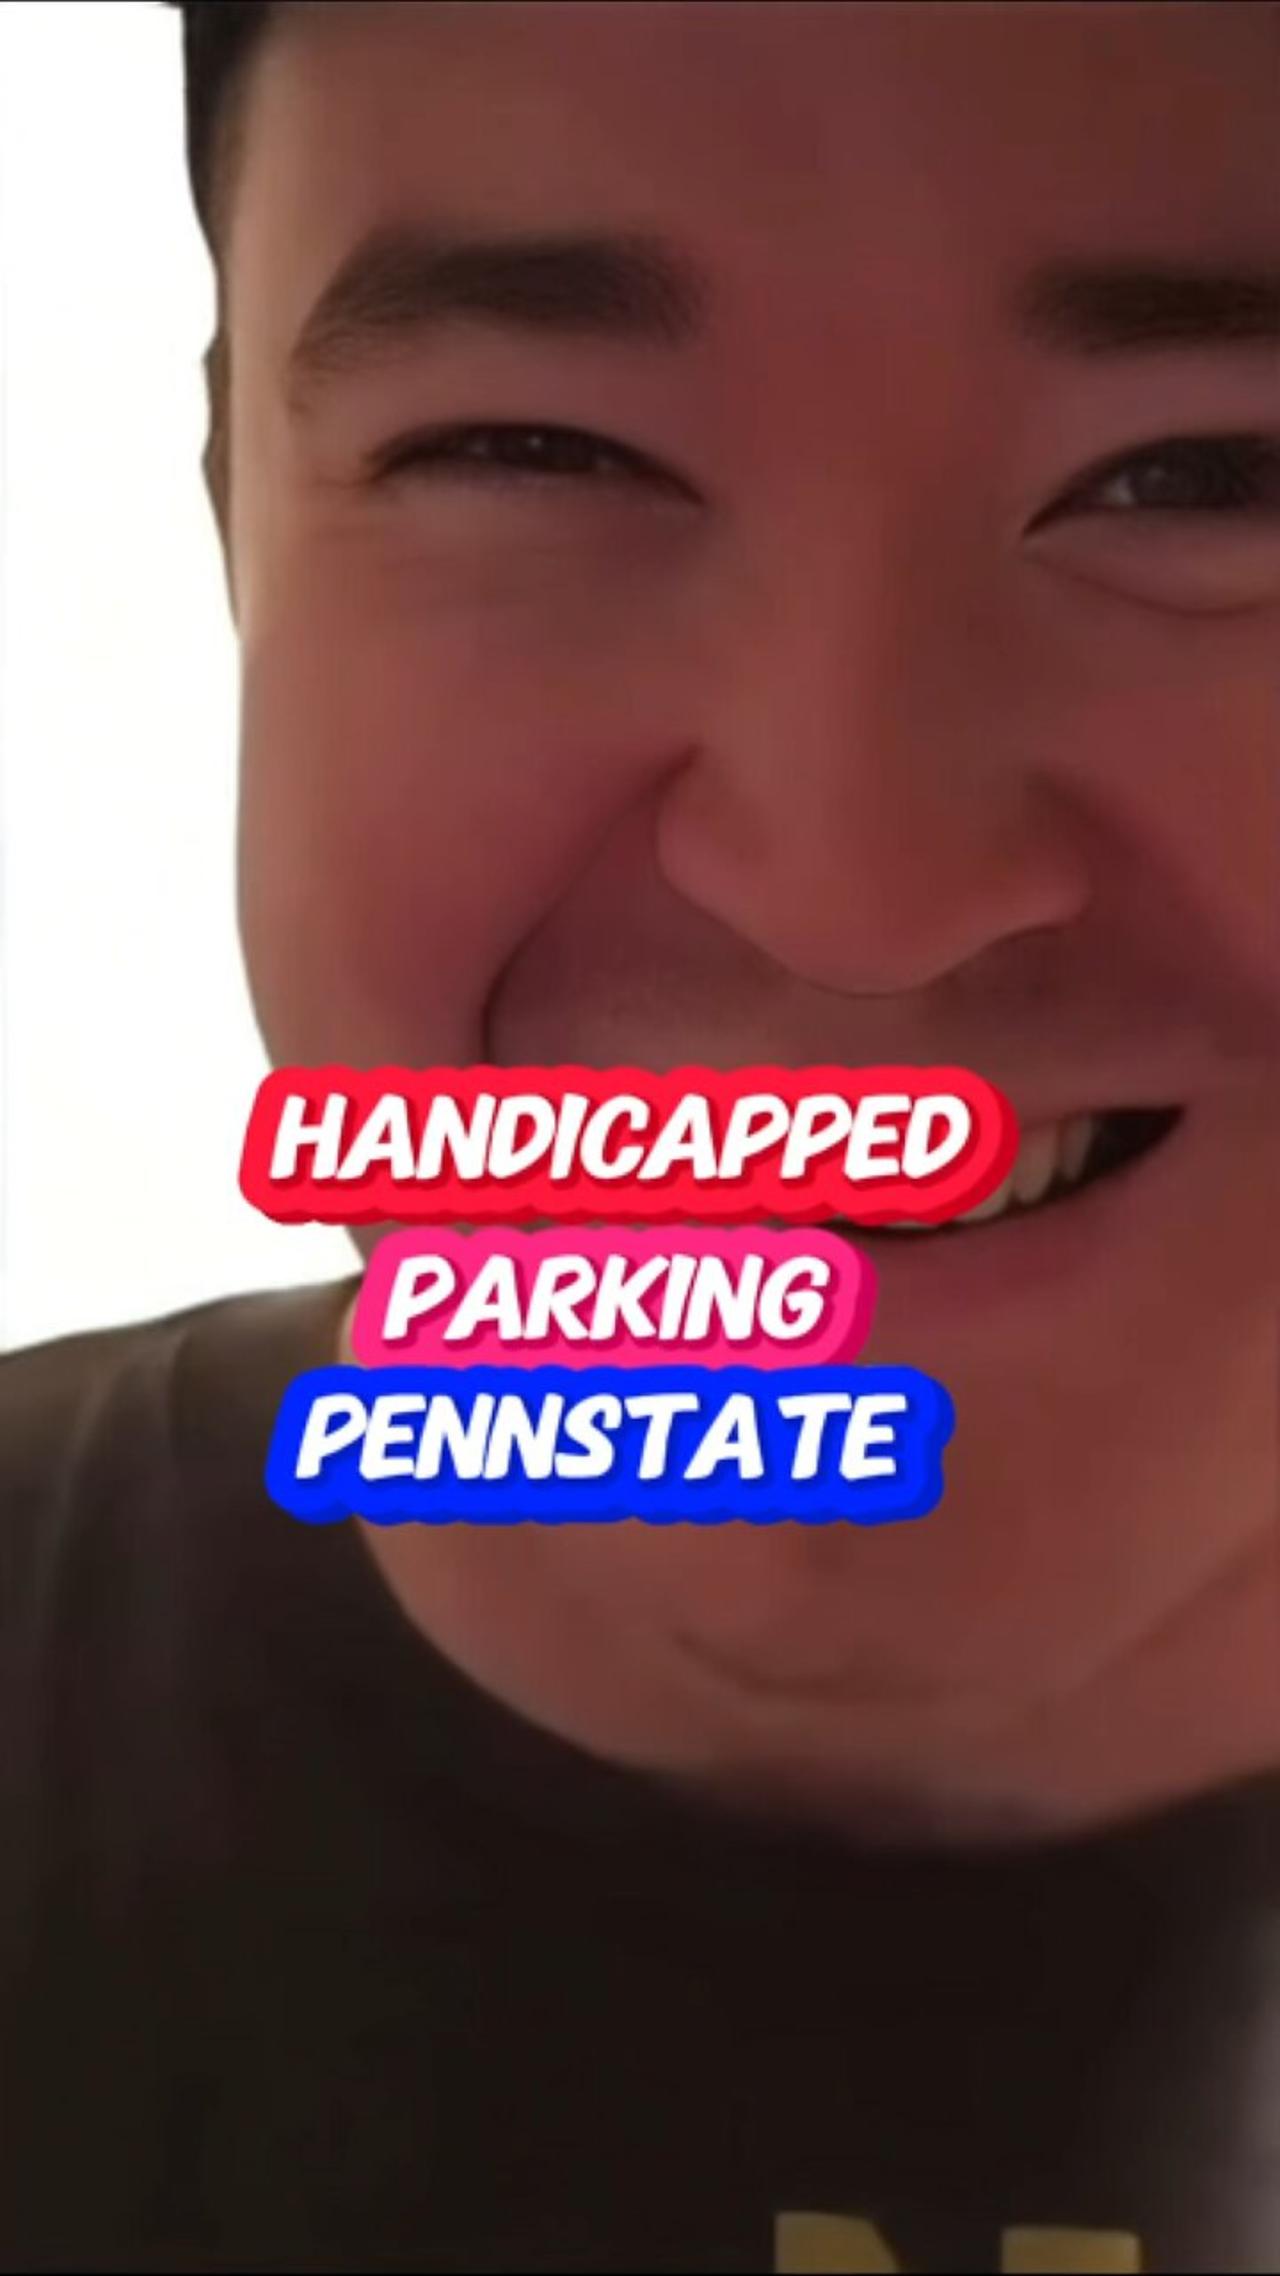 Handicapped Parking Pennstate #comedy #eloypezedits #parking